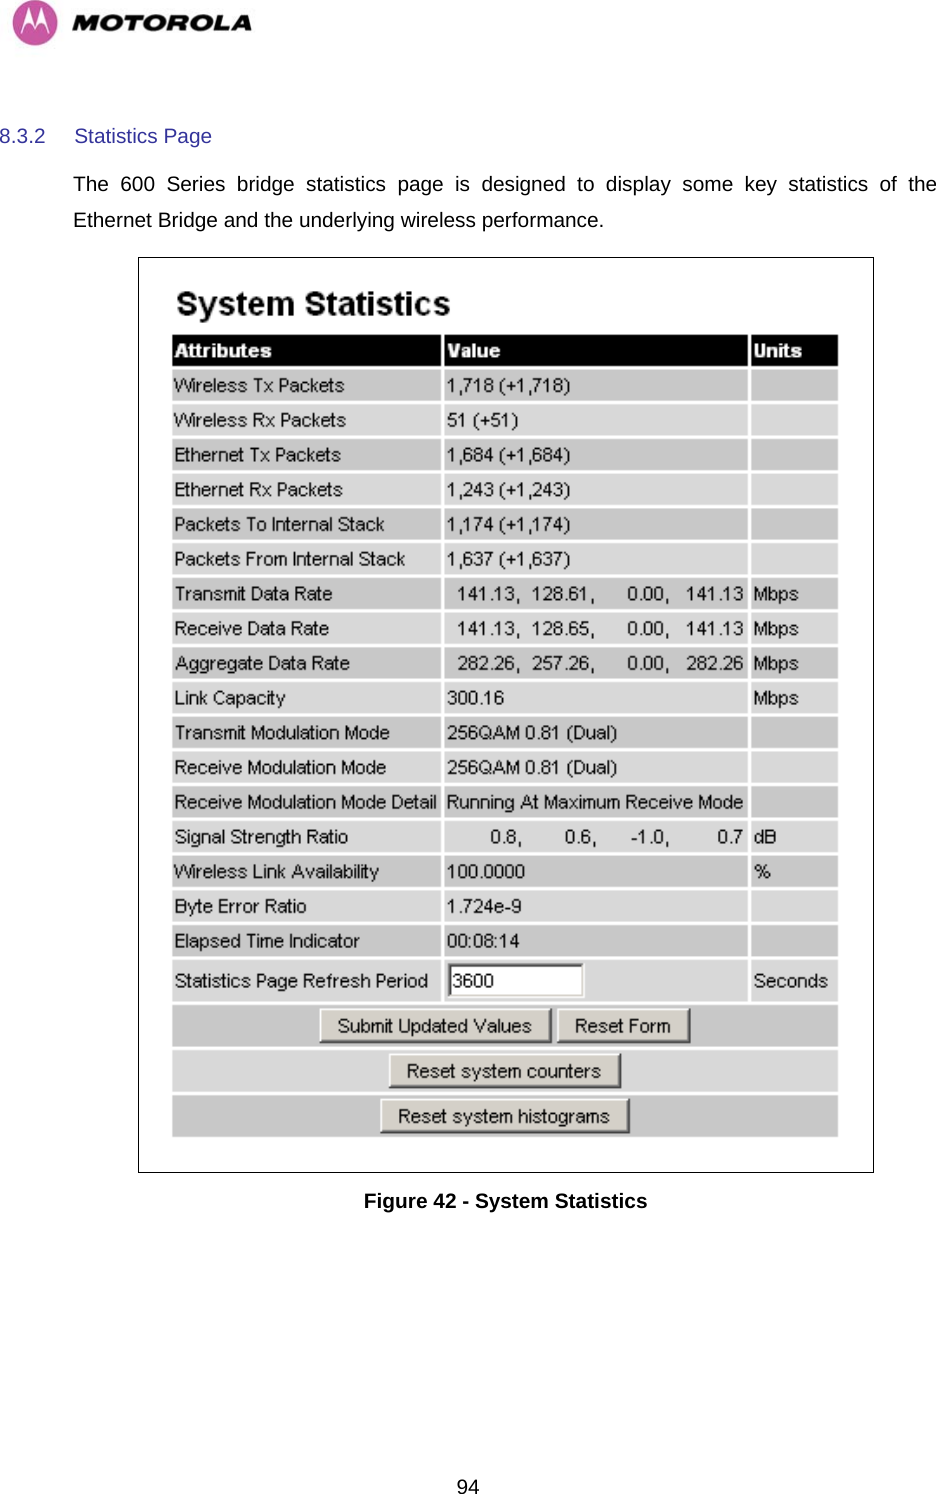   948.3.2  Statistics Page  The 600 Series bridge statistics page is designed to display some key statistics of the Ethernet Bridge and the underlying wireless performance.   Figure 42 - System Statistics 